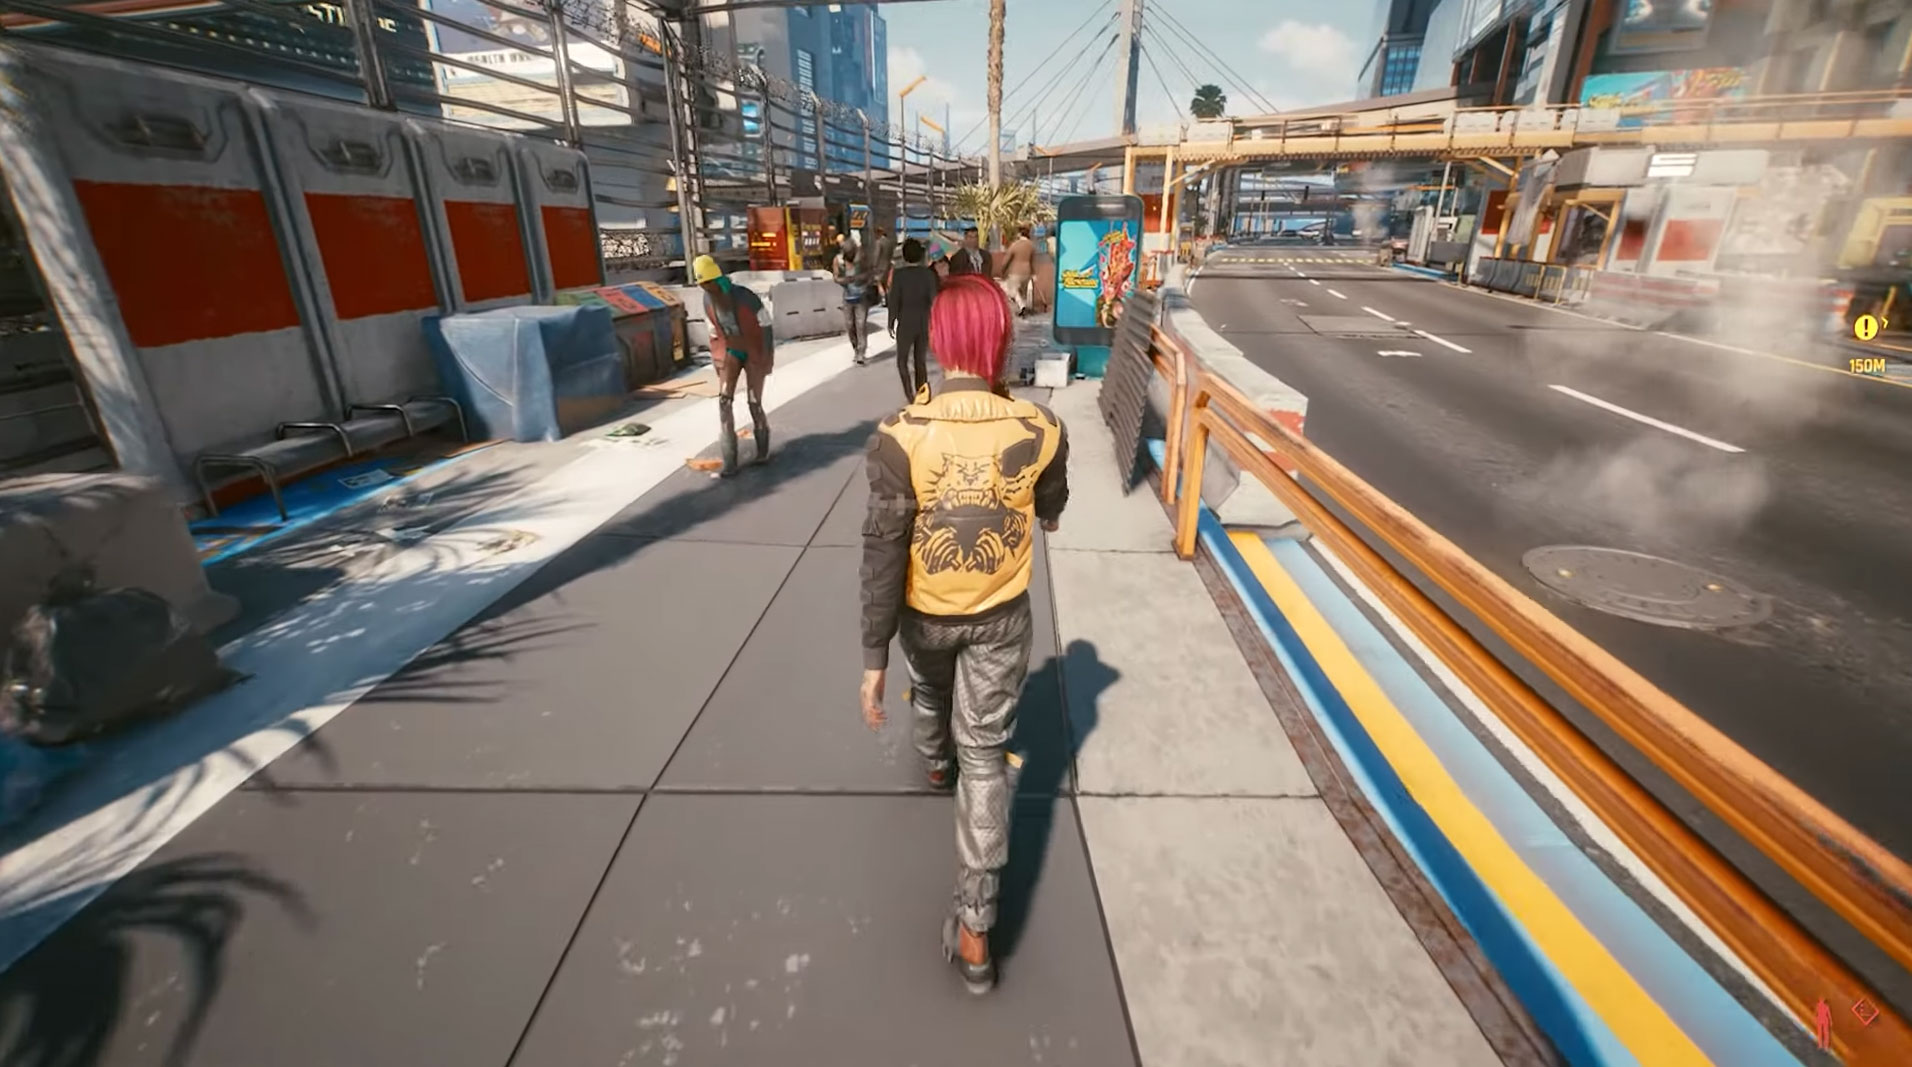 Cyberpunk 2077 Mod Lets You Experience Your Brain On